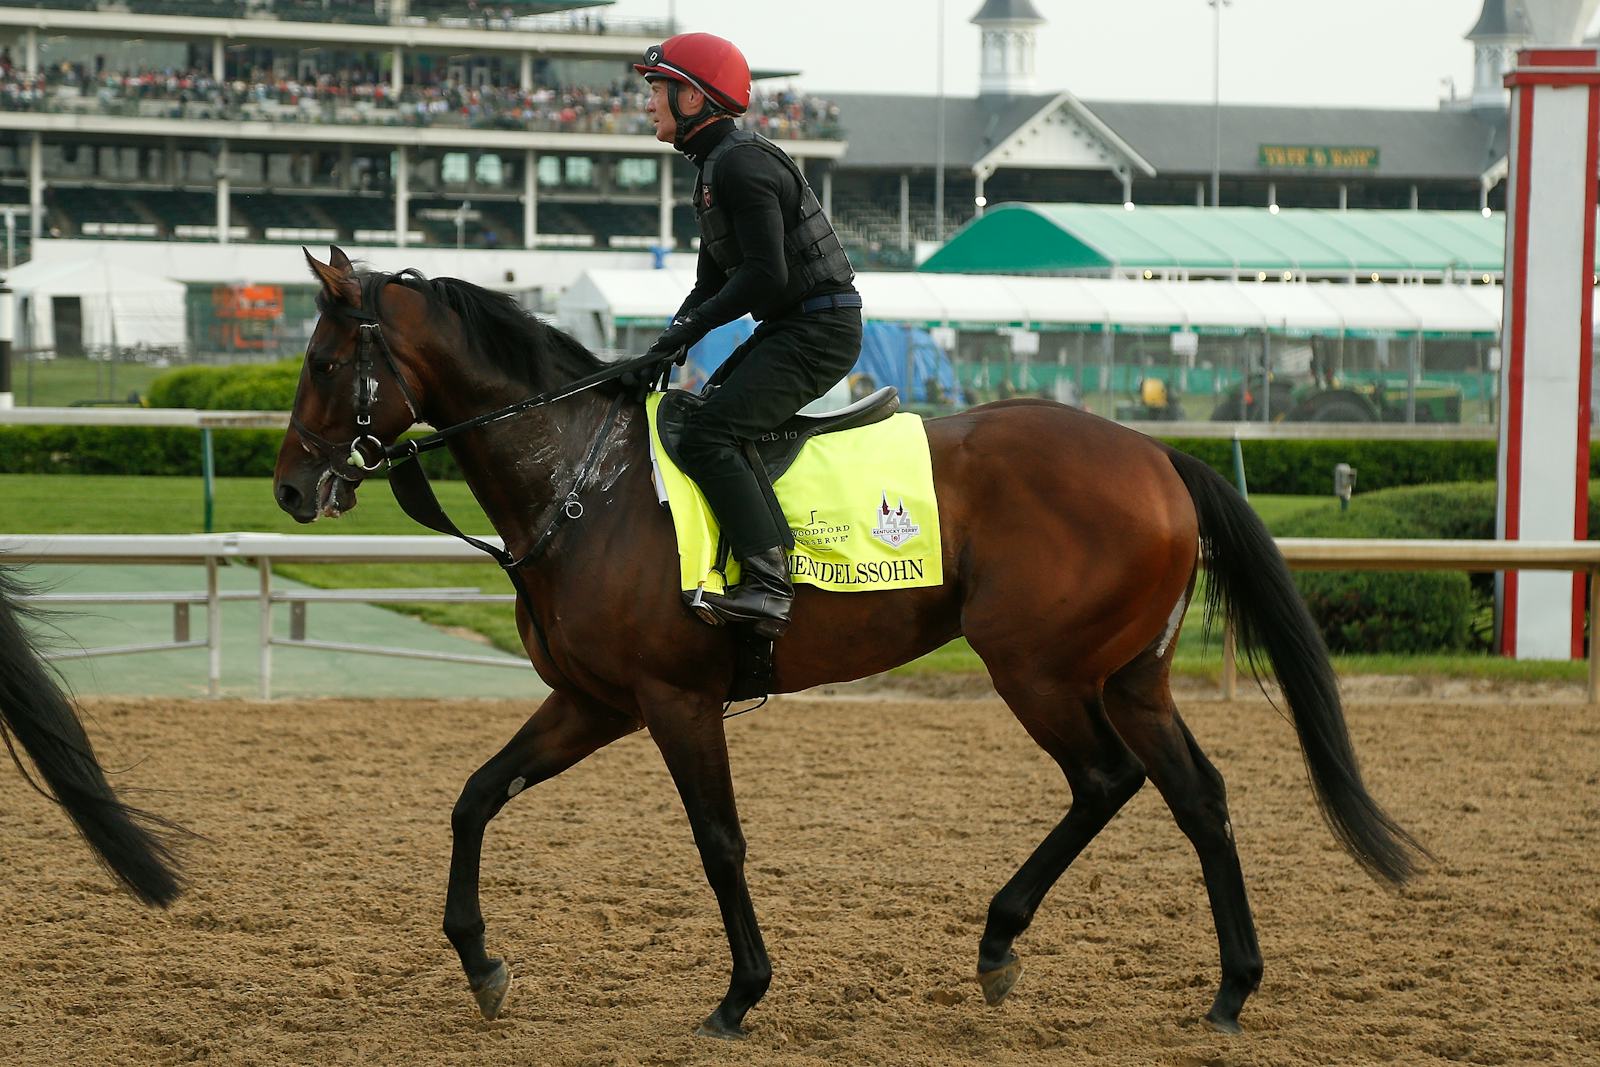 What Does The Name Mendelssohn Mean? This Kentucky Derby Horse Has A